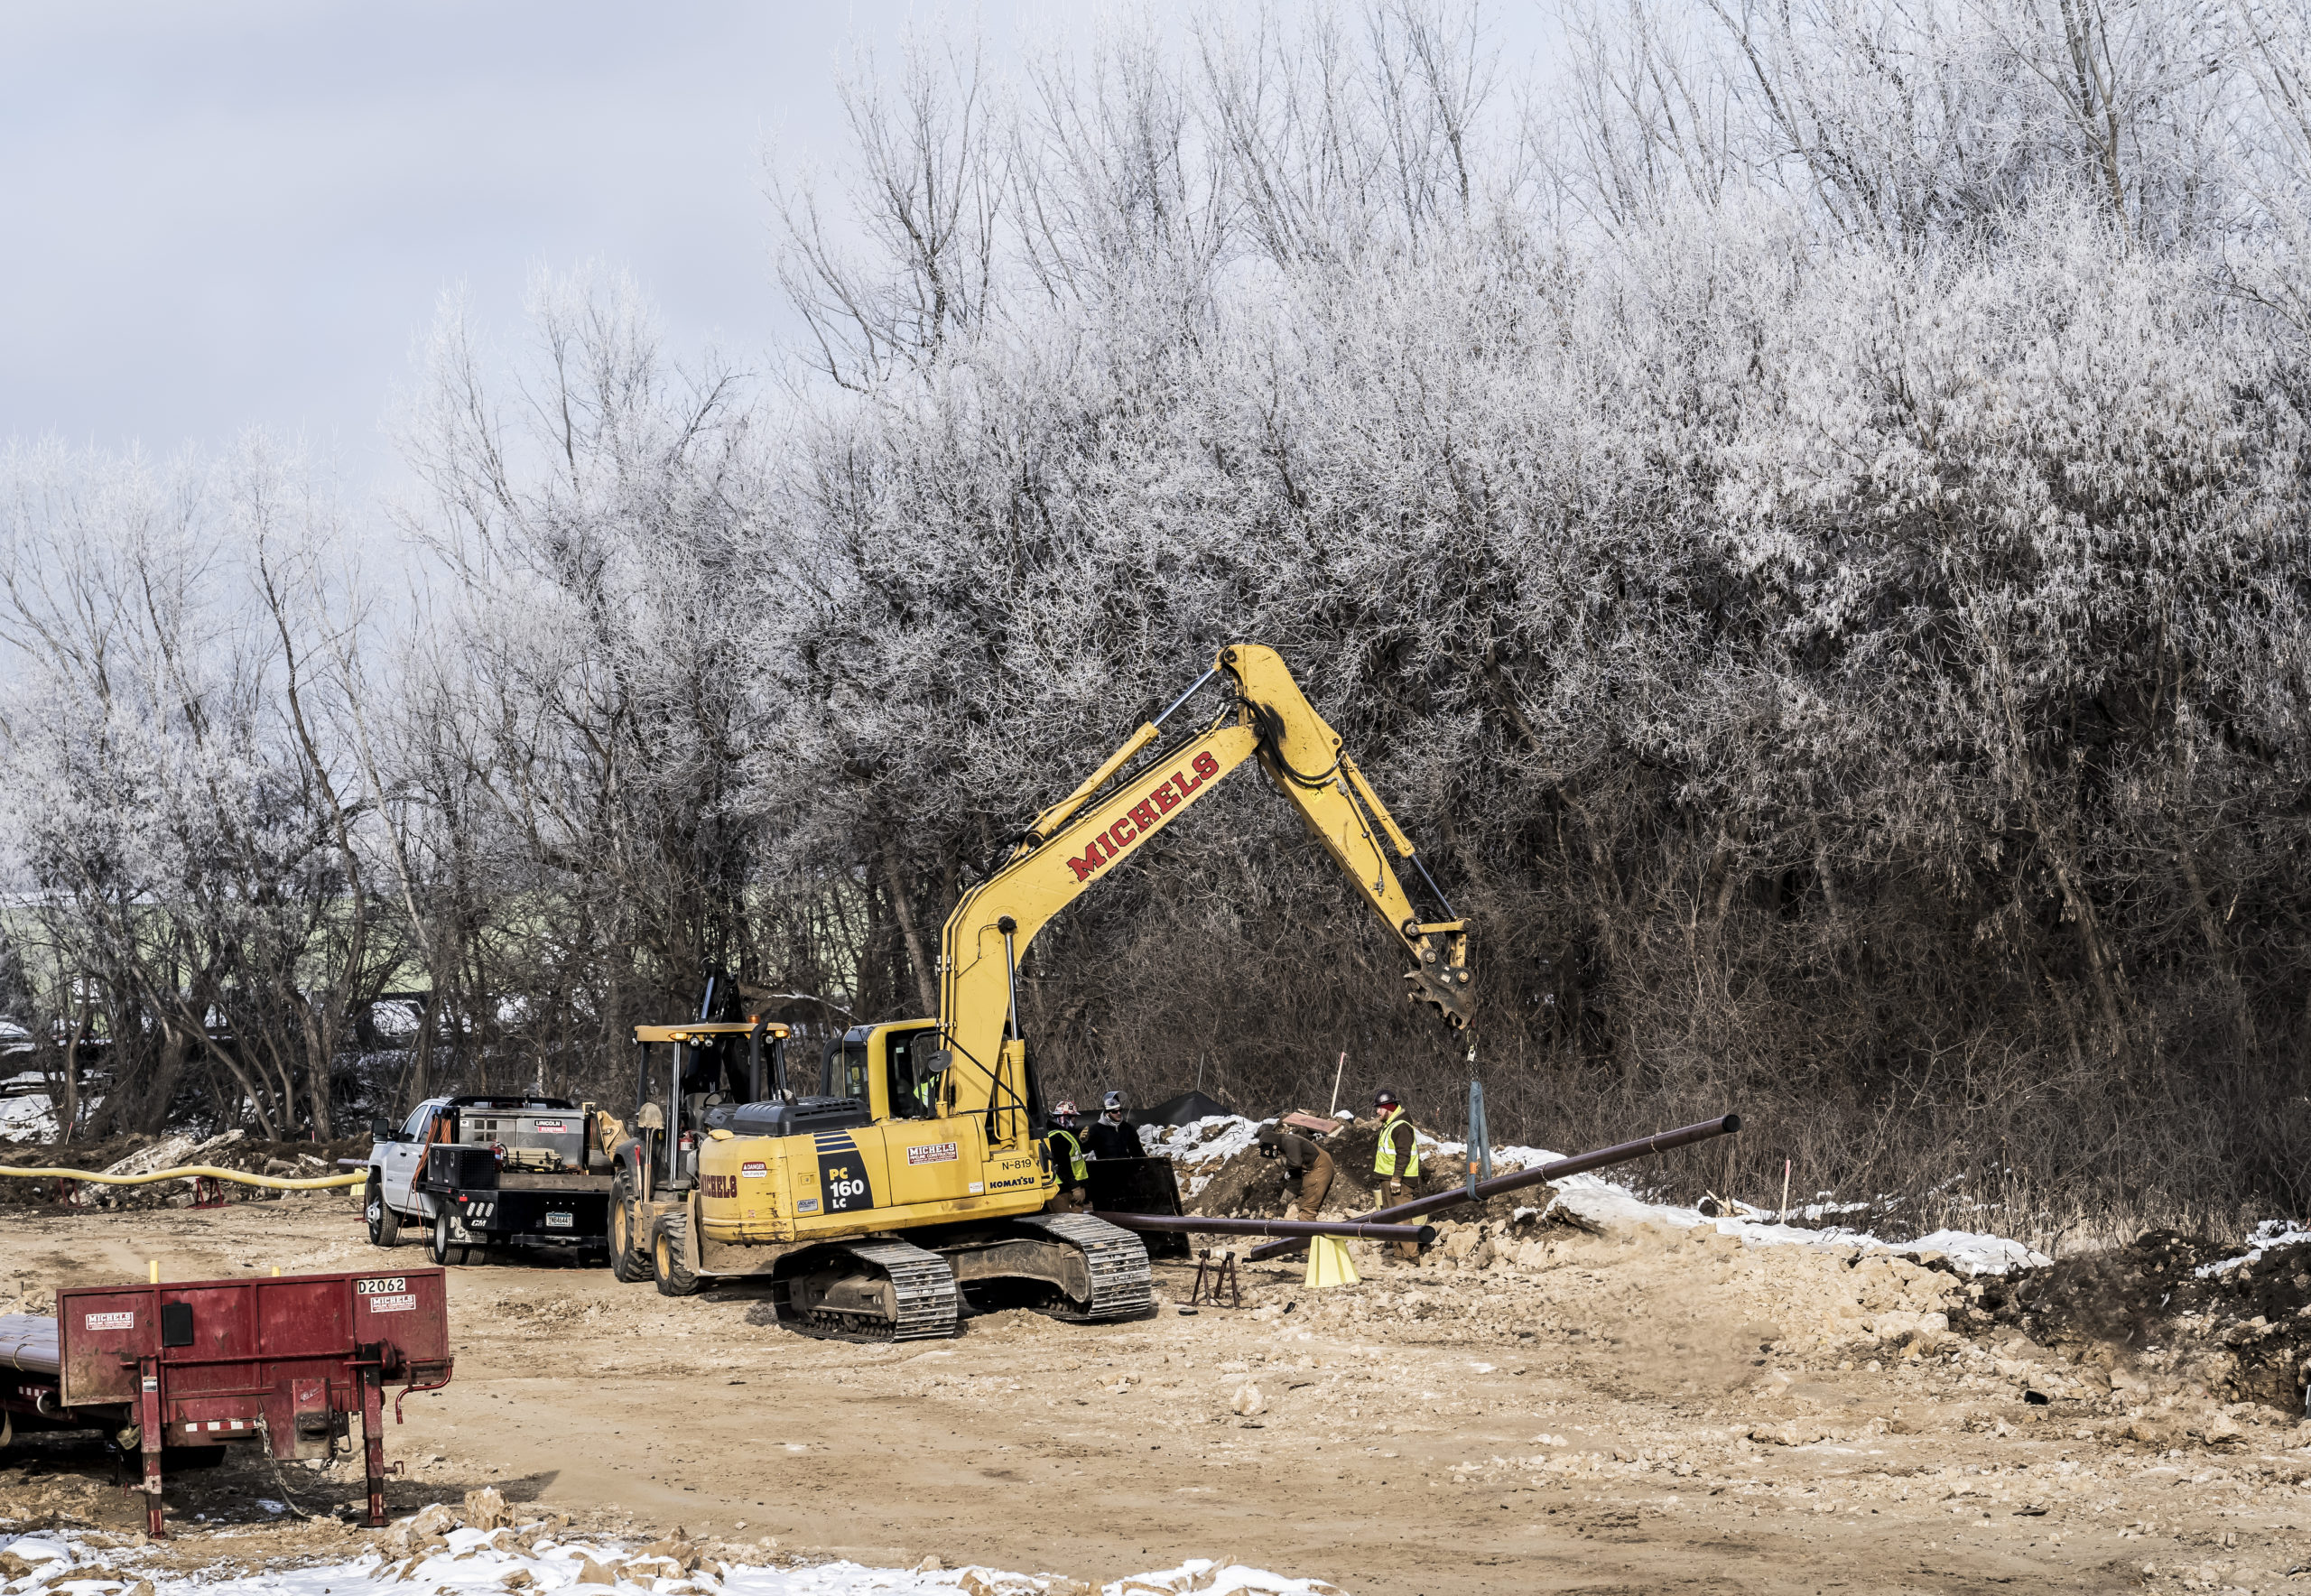 Excavator carries pipe into place on a winter day